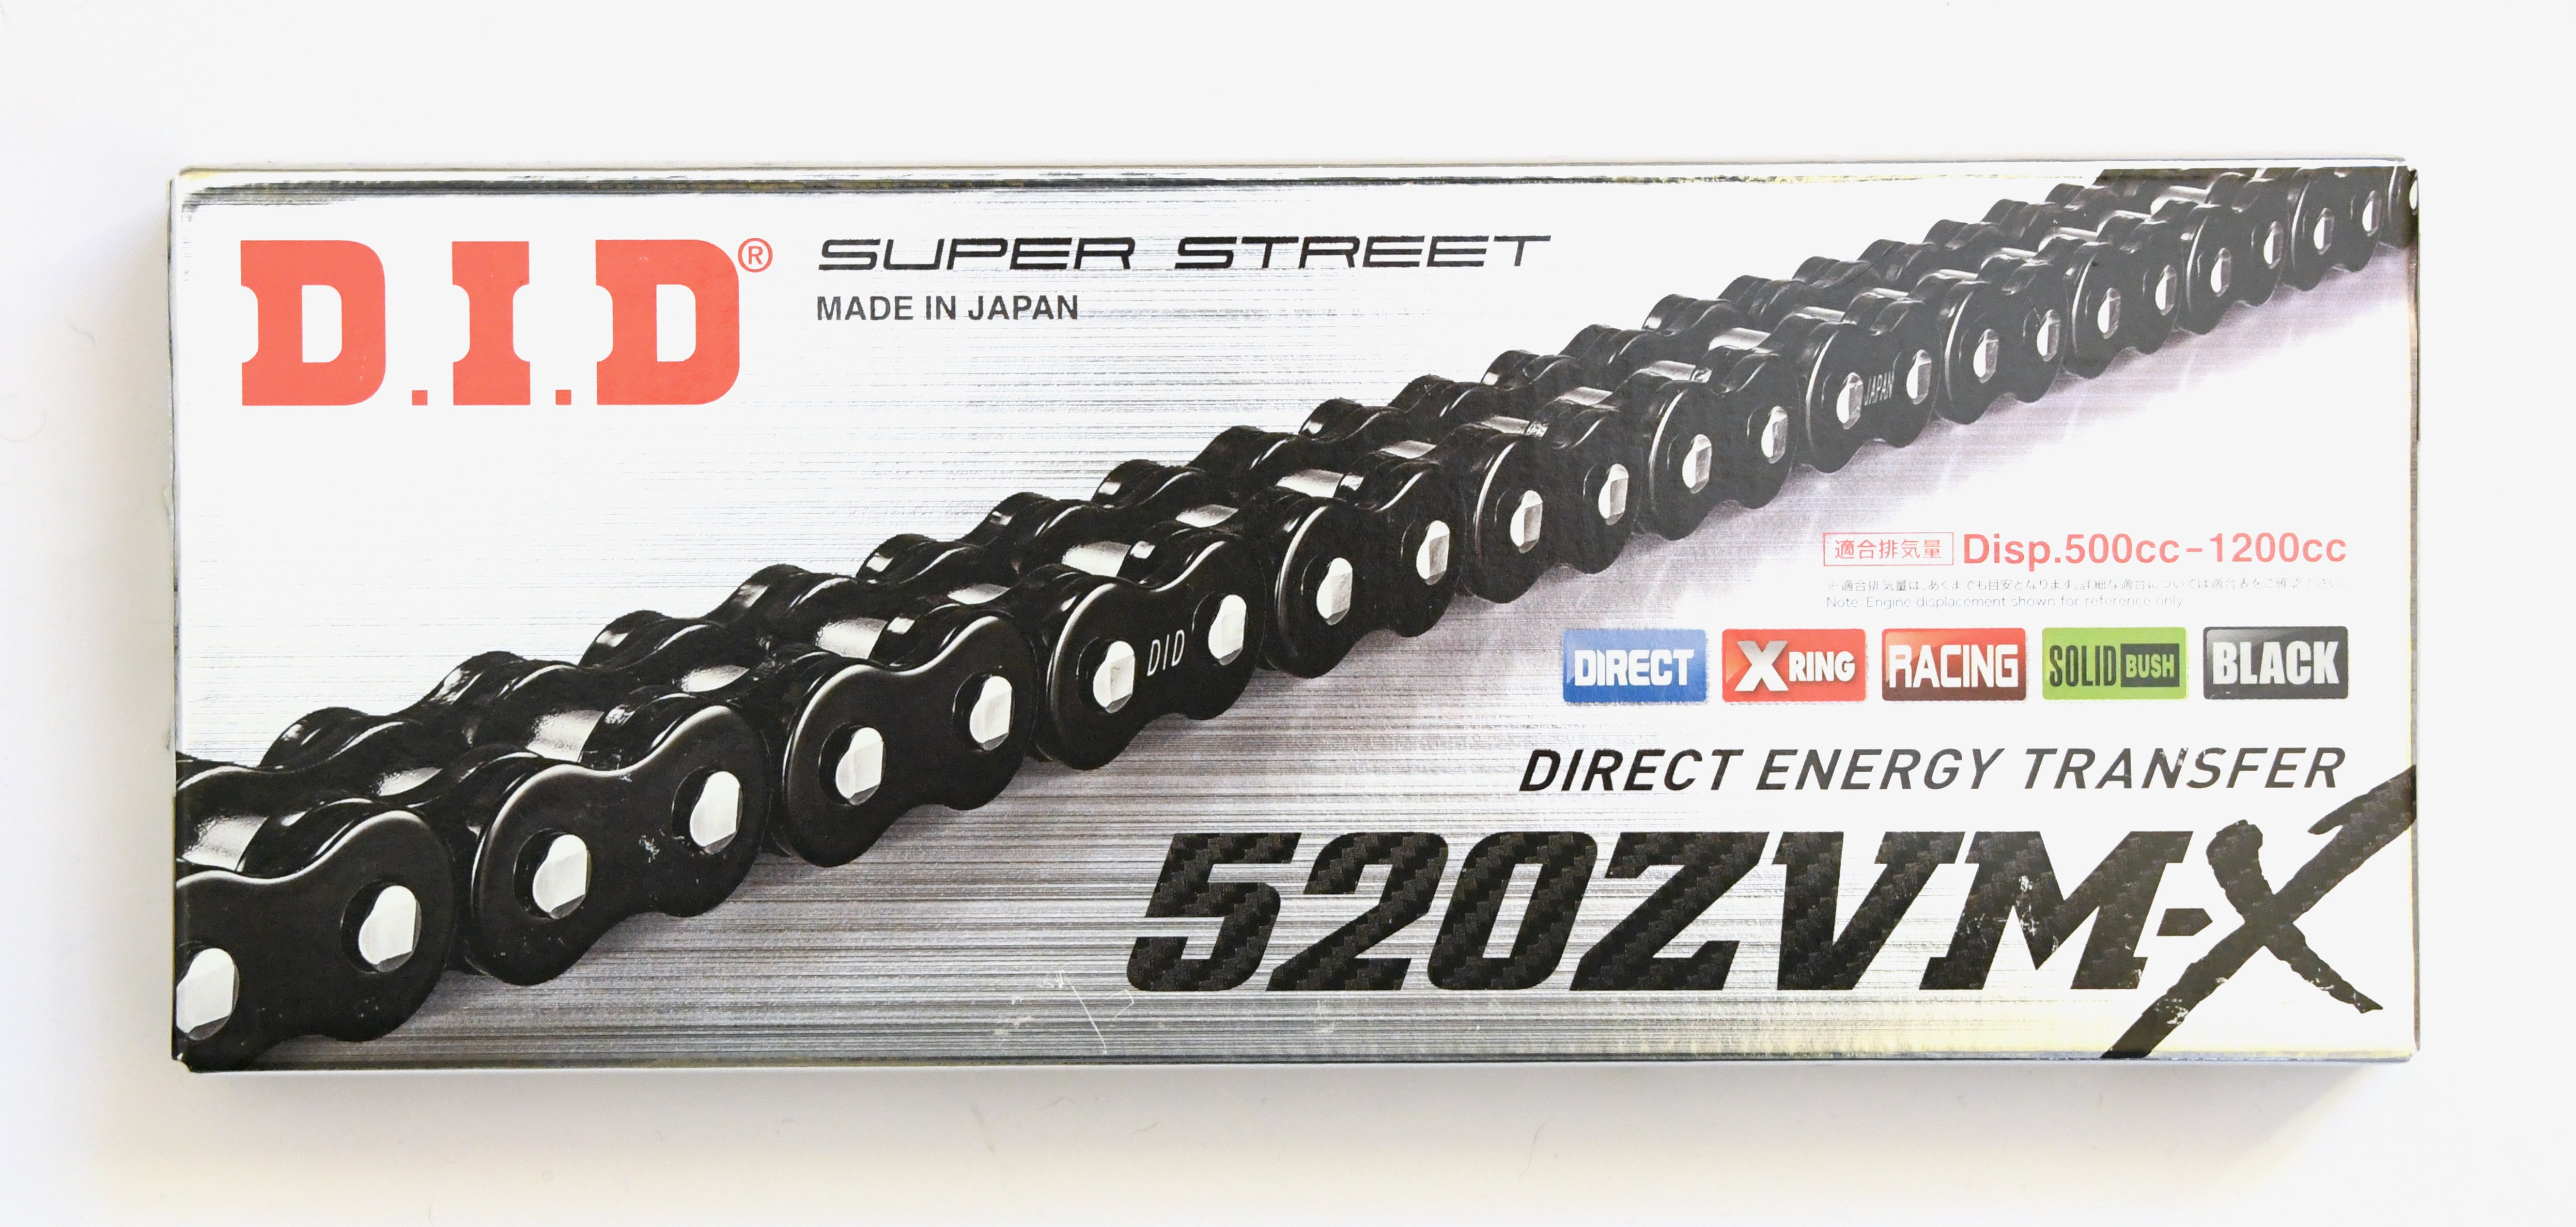 DID 520 ZVMX Super Street Extra Heavy Duty Chain 120 Links - Choice of Colour